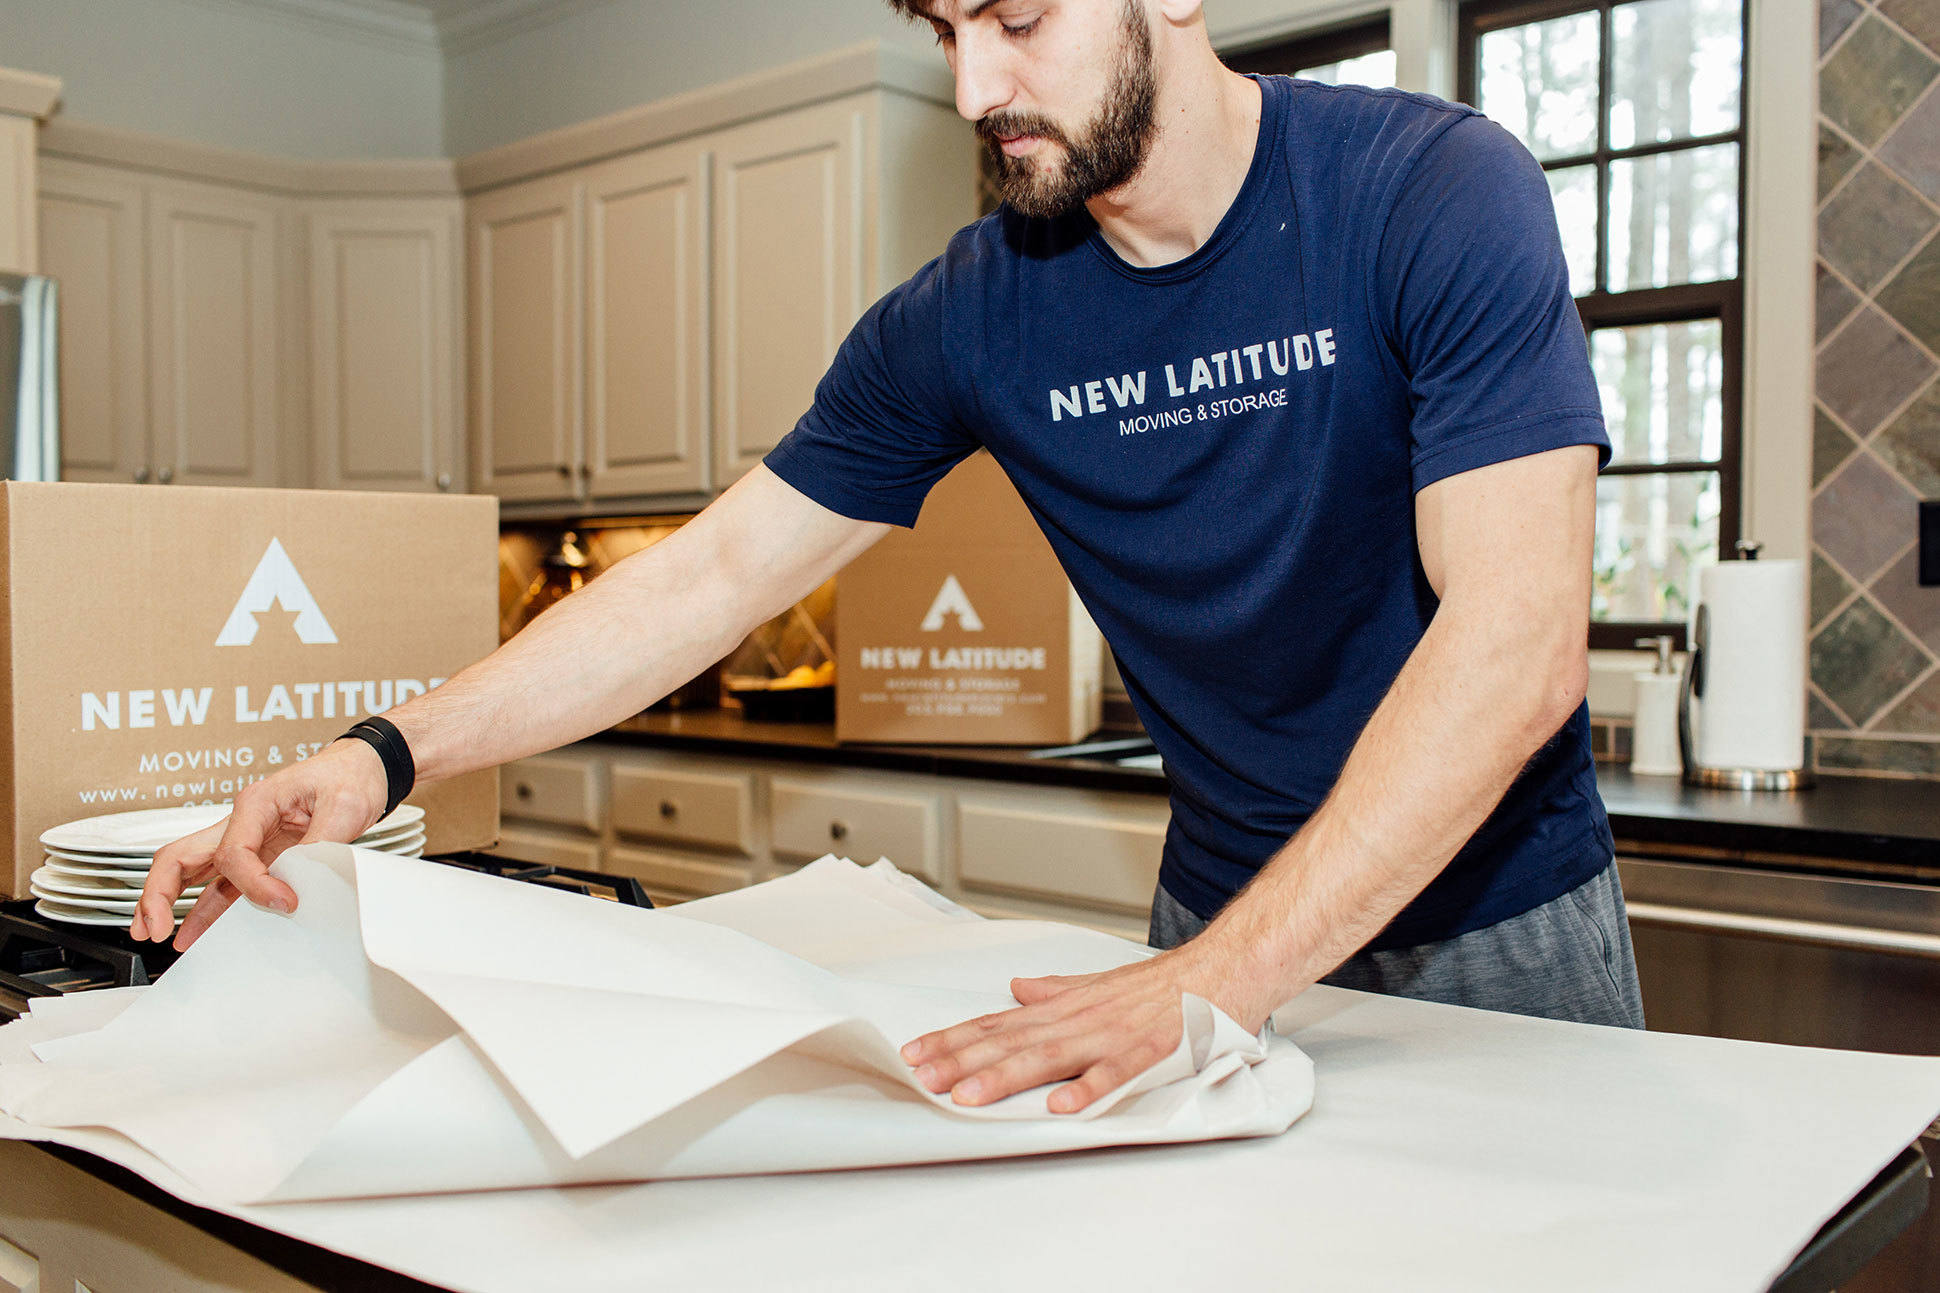 movers and packers, movers birmingham al, packing supplies